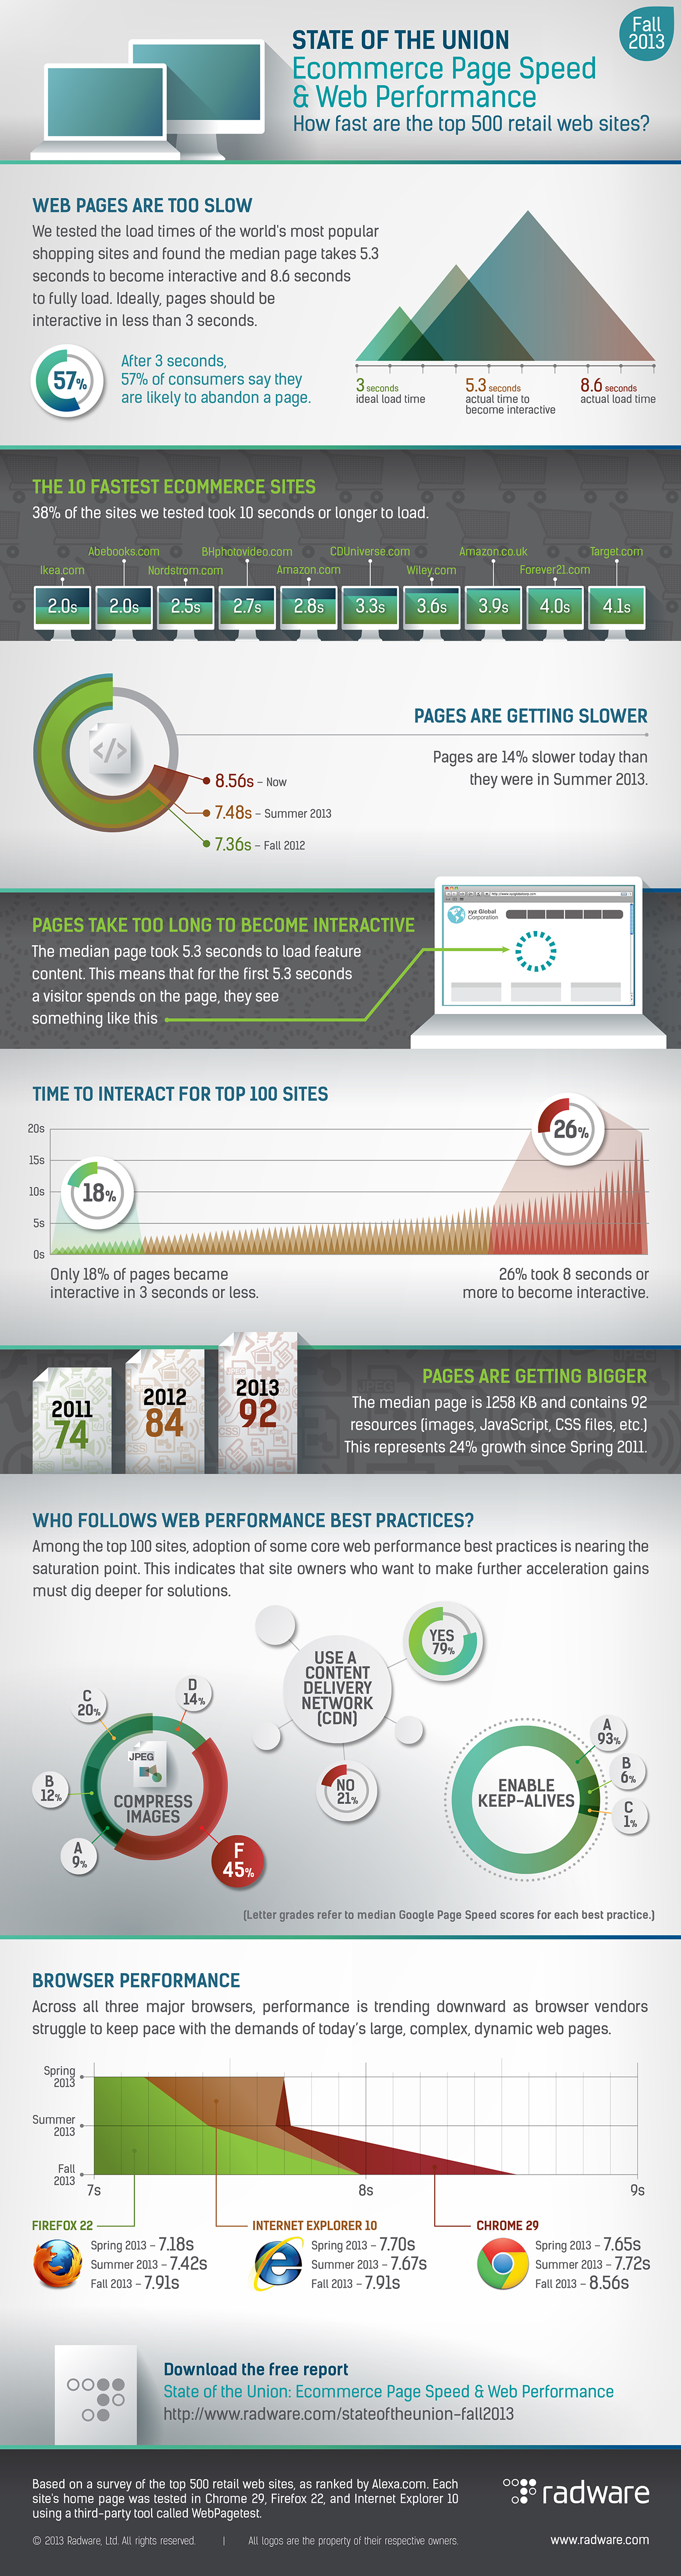 2013 Fall State of the Union: Ecommerce Page Speed & Web Performance Infographic